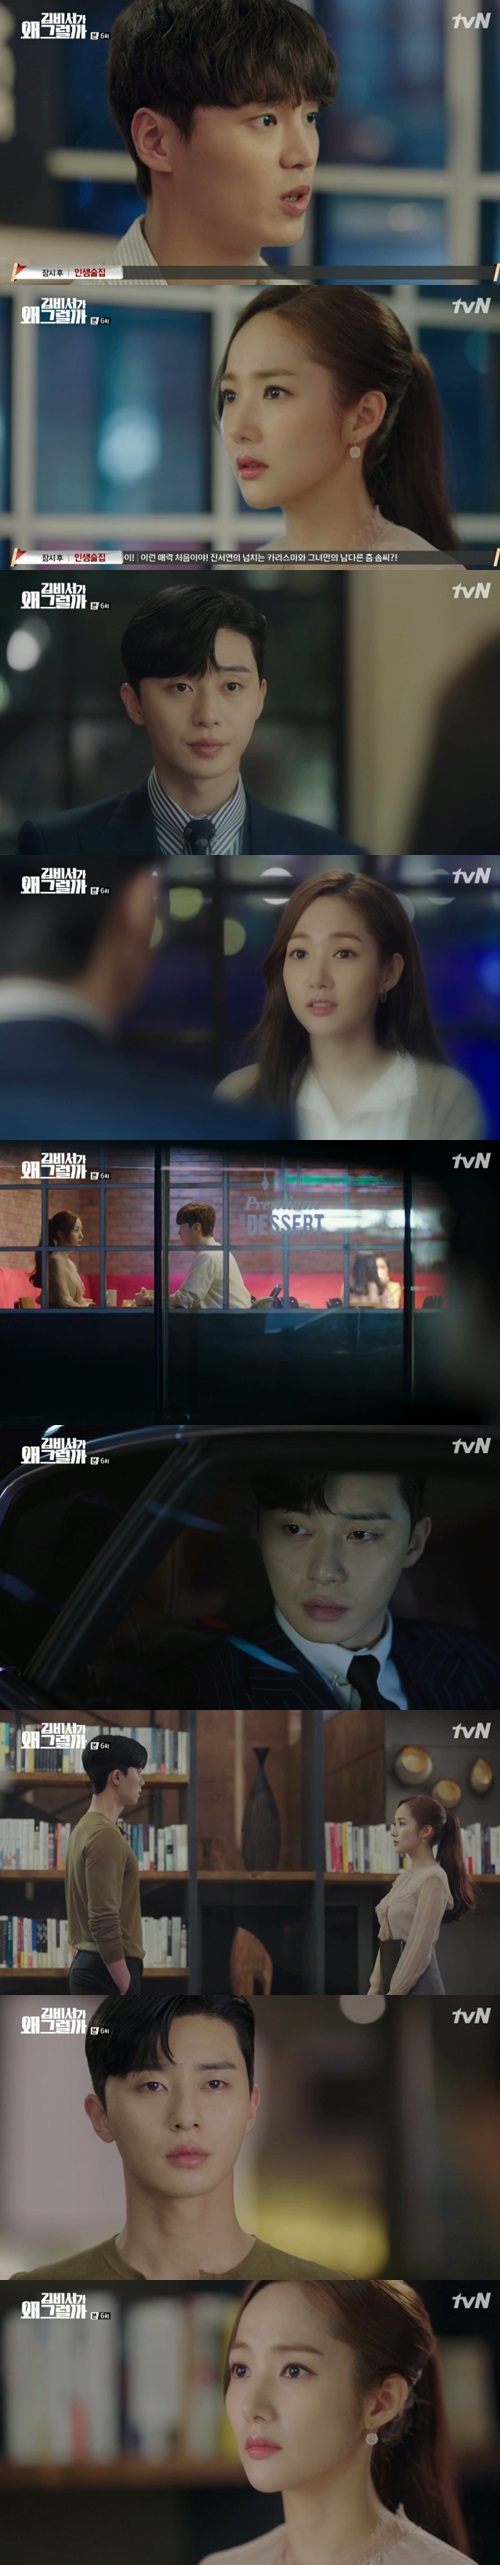 Park Min-young was confused to hear the mixed past of Park Seo-joon and Lee Tae-hwan.In the 6th episode of the TVN drama Why Secretary Kim Will Do It on June 21 (playplayed by Jung Eun-young/directed by Park Joon-hwa), Park Min-young suspected Lee Yeongjun (Park Seo-joon) and Lee Sung-yeon (Lee Tae-hwan) as his brother in Memory in turn.Lee Yeongjun pushed Kim Mi-so because of the trauma of his childhood trying to kiss Kim Mi-so, and Kim Mi-so, who was pushed out of his chair, exploded with anger because Lee Yeongjun pushed him because of his narcissism.Kim Mi-so left the office immediately, saying he wasnt sure he would see Lee Yeongjun, and paid by the next month, but Kim Mi-so, who had lived up to Lee Yeongjun, had nothing to do.Lee Sung-yeon came to the company where Kim Mi-so was away, and female employees cheered on the emergence of novelist Morpheus.Kim Ji-ah (Pyo Ye-jin) and Bong Se-ra (Hwang Bo-ra) were signed in front of them, and Lee Yeongjun told himself, I was good to rest today.Lee Yeongjun, who overheard Kim Ji-ahs phone conversation with Kim Mi-so, went home knowing that Kim Mi-so was doing nothing.Kim Mi-so and Lee Yeongjun, who were wandering around the neighborhood, met, and Lee Yeongjun said he had planned a date for Kim Mi-so.Kim Mi-so refused, saying, I do not want to fit with the vice chairman today, and Lee Yeongjun promised, I will give it to you today.Kim Mi-so traveled by bus with Lee Yeongjun before going to a shabby regular shell house.Kim Mi-so assumed that the son of the chairman, who was in the fourth grade at the time, was Lee Yeongjun, and that his brother, who met when he was trapped in an empty house, was Lee Yeongjun.Kim Mi-so expressed his delight in saying, I am glad to see you again, considering that Lee Yeongjun had not spoken for nine years.Lee Yeongjun wondered as Kim Mi-sos feelings for him suddenly deepened.Lee Yeongjun picked up a failed doll the day before to raise Kim Mi-sos feelings and presented it to Kim Mi-so.Kim Mi-so bought a caramel that Lee Yeongjun gave in 1994 in return, but Kim Ji-ah showed that Lee Sung-yeon had been kidnapped in the past, and he thought that his brother who met at the time was Lee Sung-yeon, not Lee Yeongjun.Kim Mi-so asked Lee Yeongjun himself, and Lee Yeongjun replied, Yes, it is my brother who was kidnapped.Lee Yeongjun said, So was it? Did you see me all day because you thought I was the brother you were looking for since childhood? Kim Mi-so said, Im sorry.I was mistaken.Kim Mi-so met Lee Sung-yeon, and Lee Sung-yeon said that Lee Yeongjun, who was a child, overtook his friends and harassed him and took him to the redevelopment area and was kidnapped.Yoo Gyeong-sang